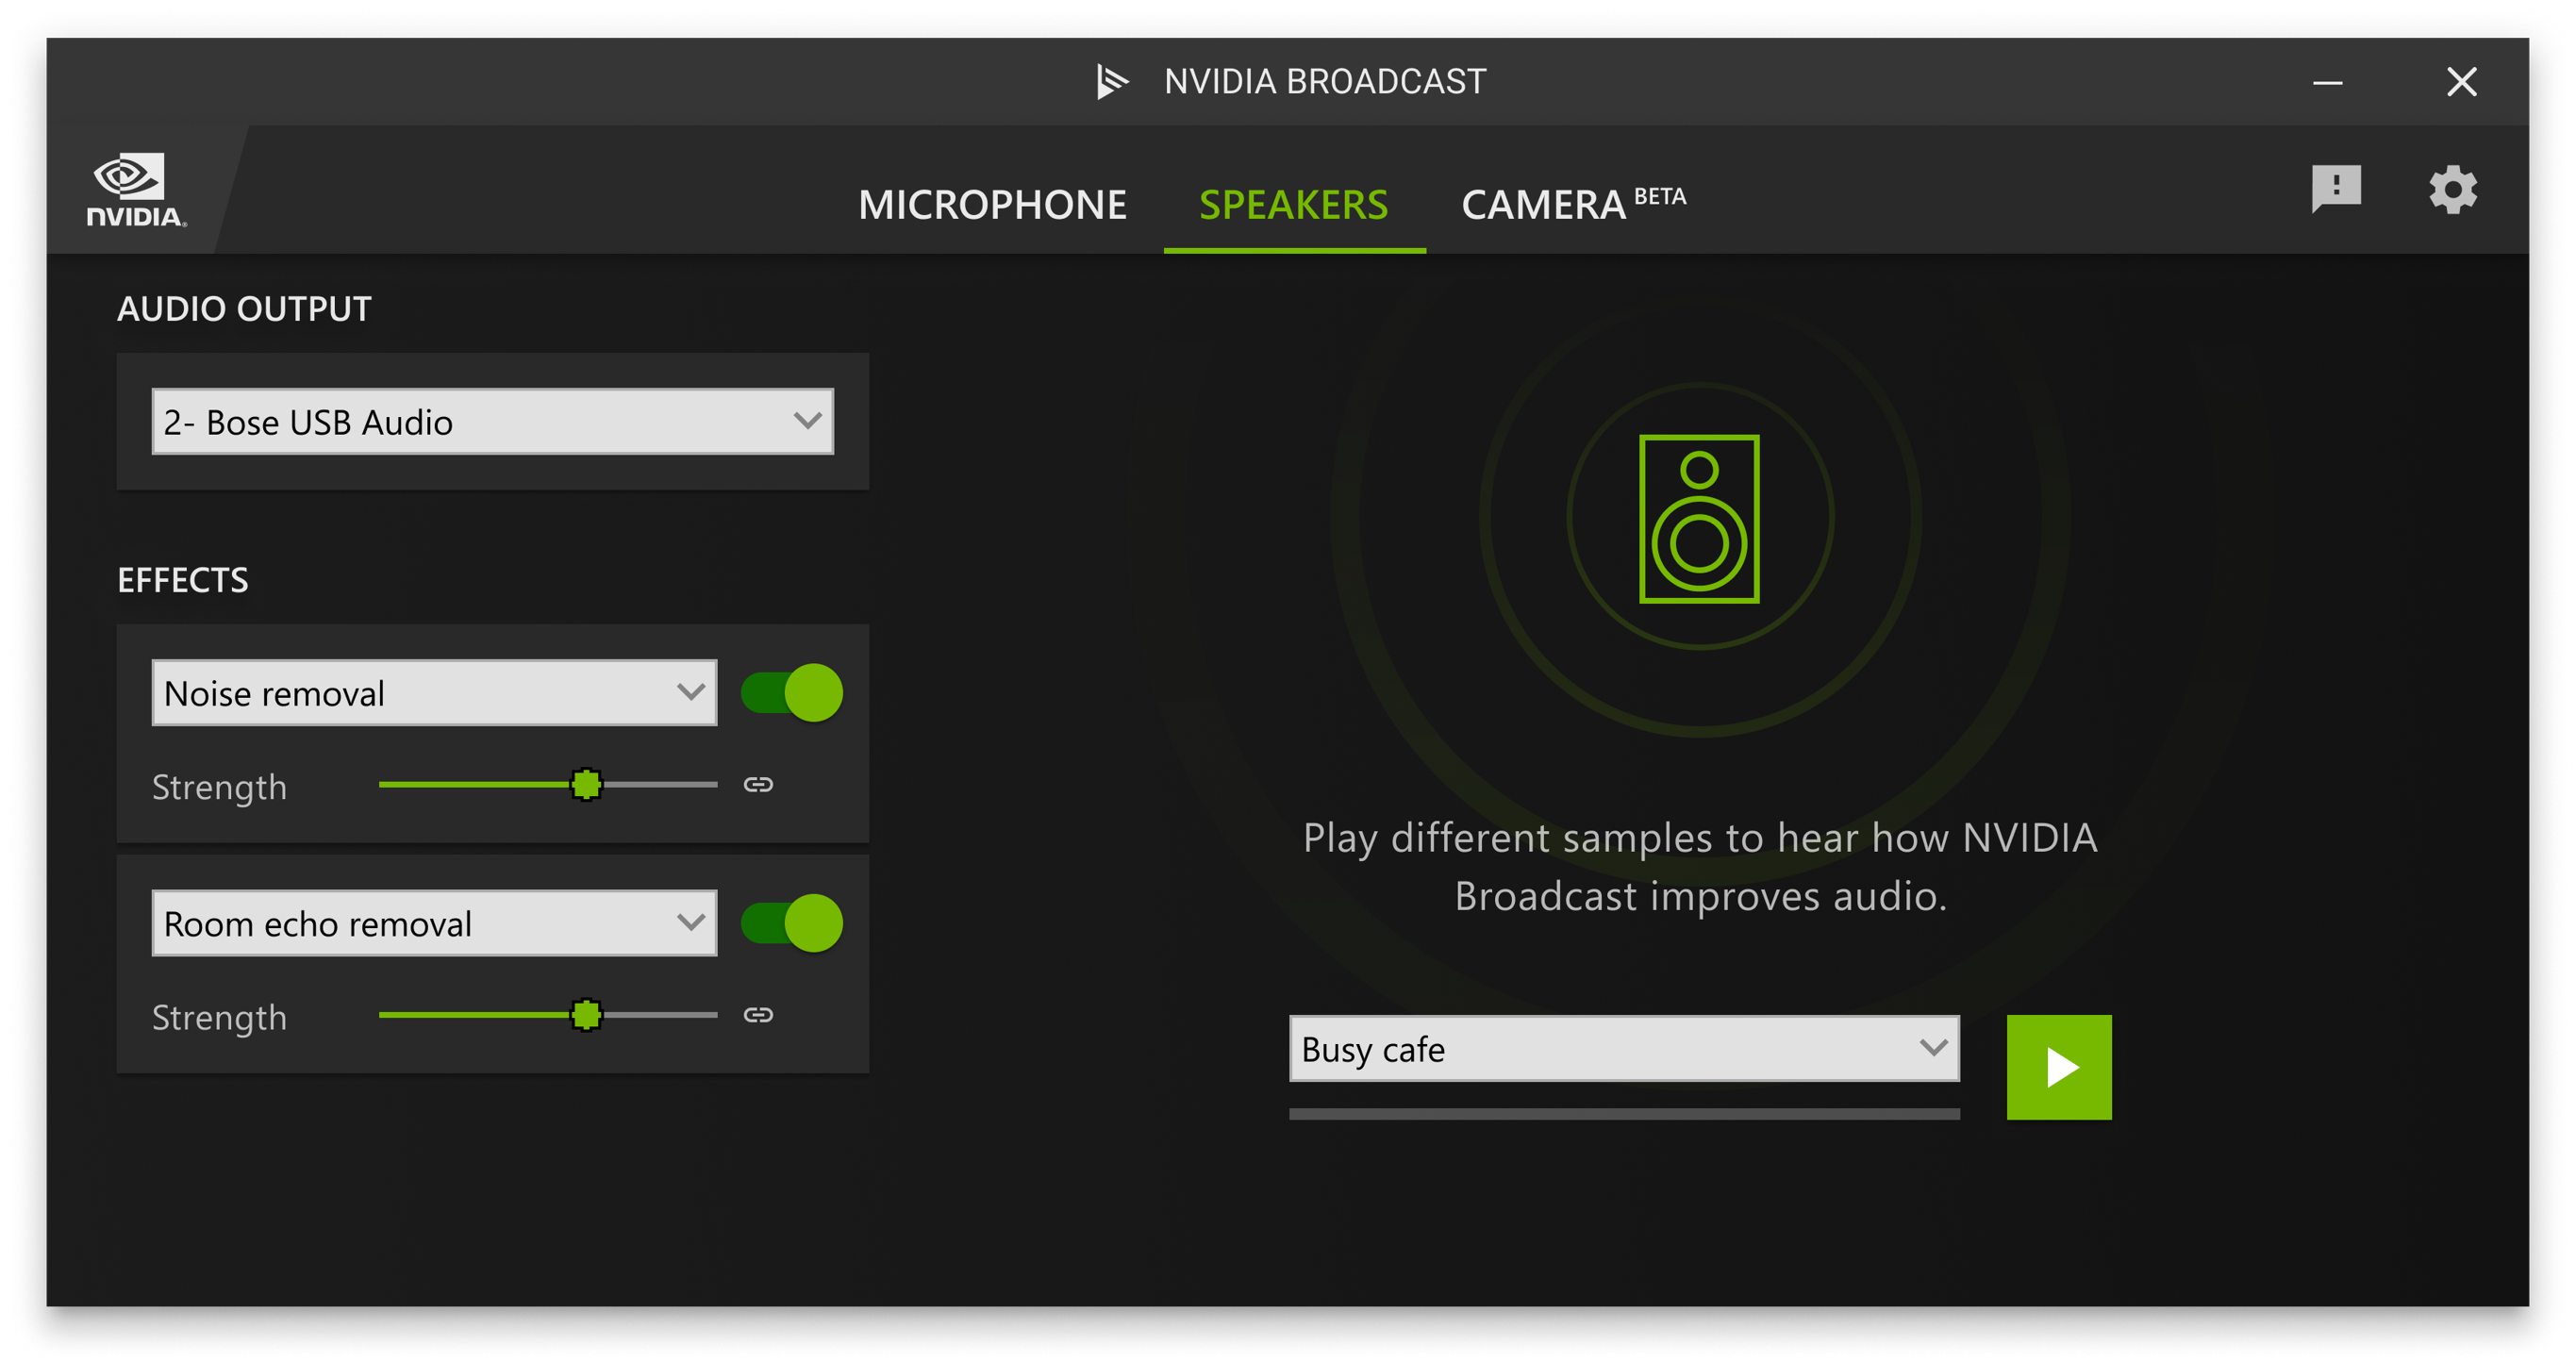 New NVIDIA Broadcast App 1.3 Update Improves Noise Removal, Adds 